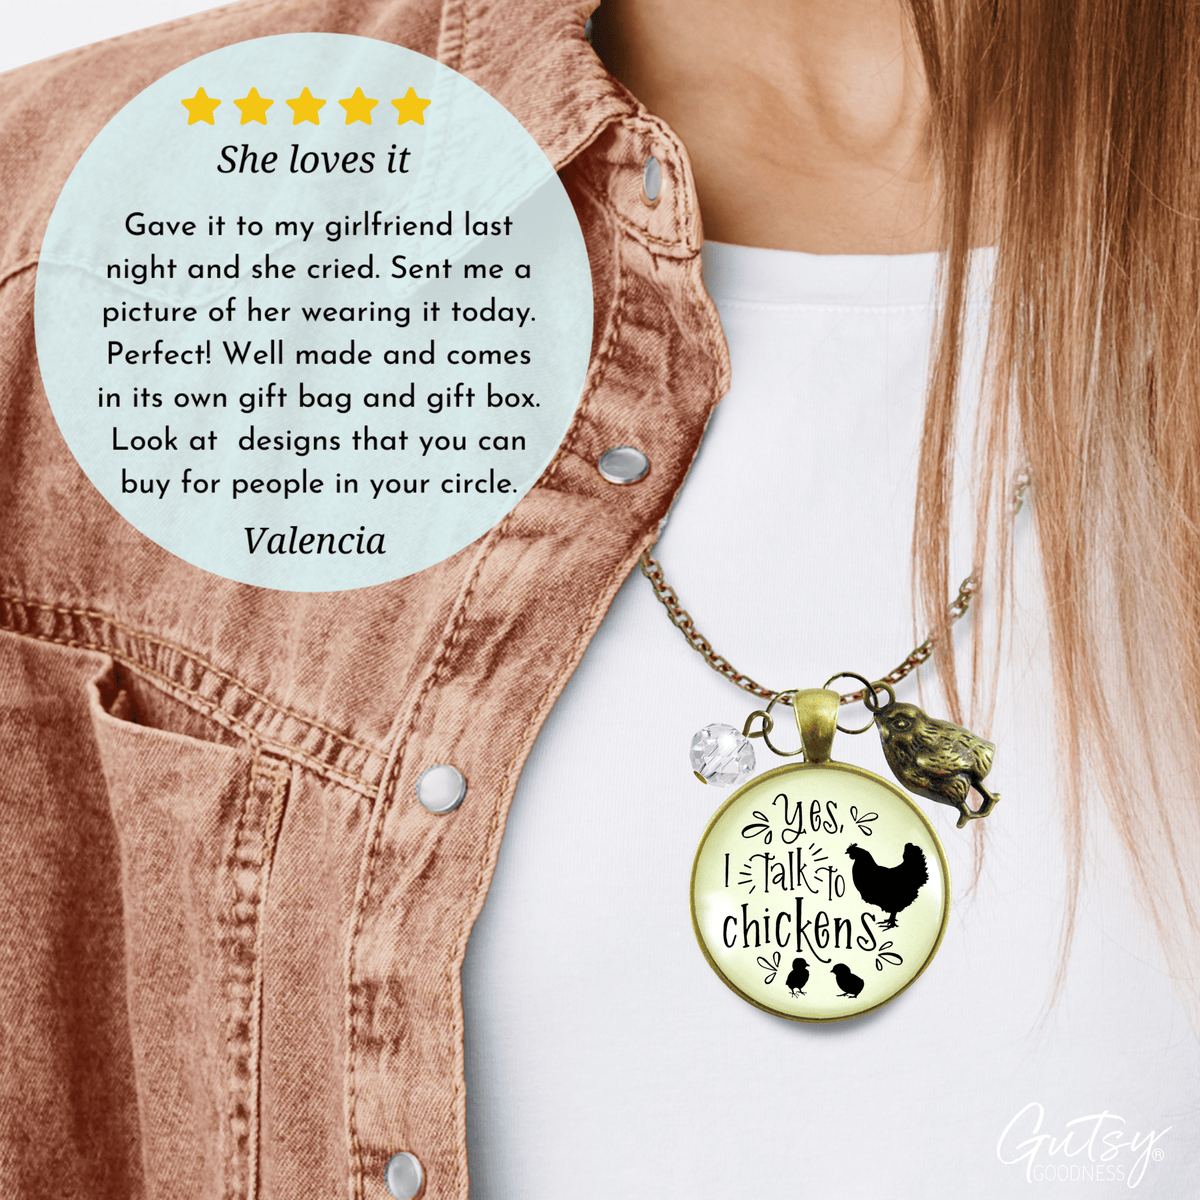 Gutsy Goodness Chicken Mom Necklace Yes I Talk To Chickens Novelty Gift Farm Life Inspired - Gutsy Goodness;Chicken Mom Necklace Yes I Talk To Chickens Novelty Gift Farm Life Inspired - Gutsy Goodness Handmade Jewelry Gifts